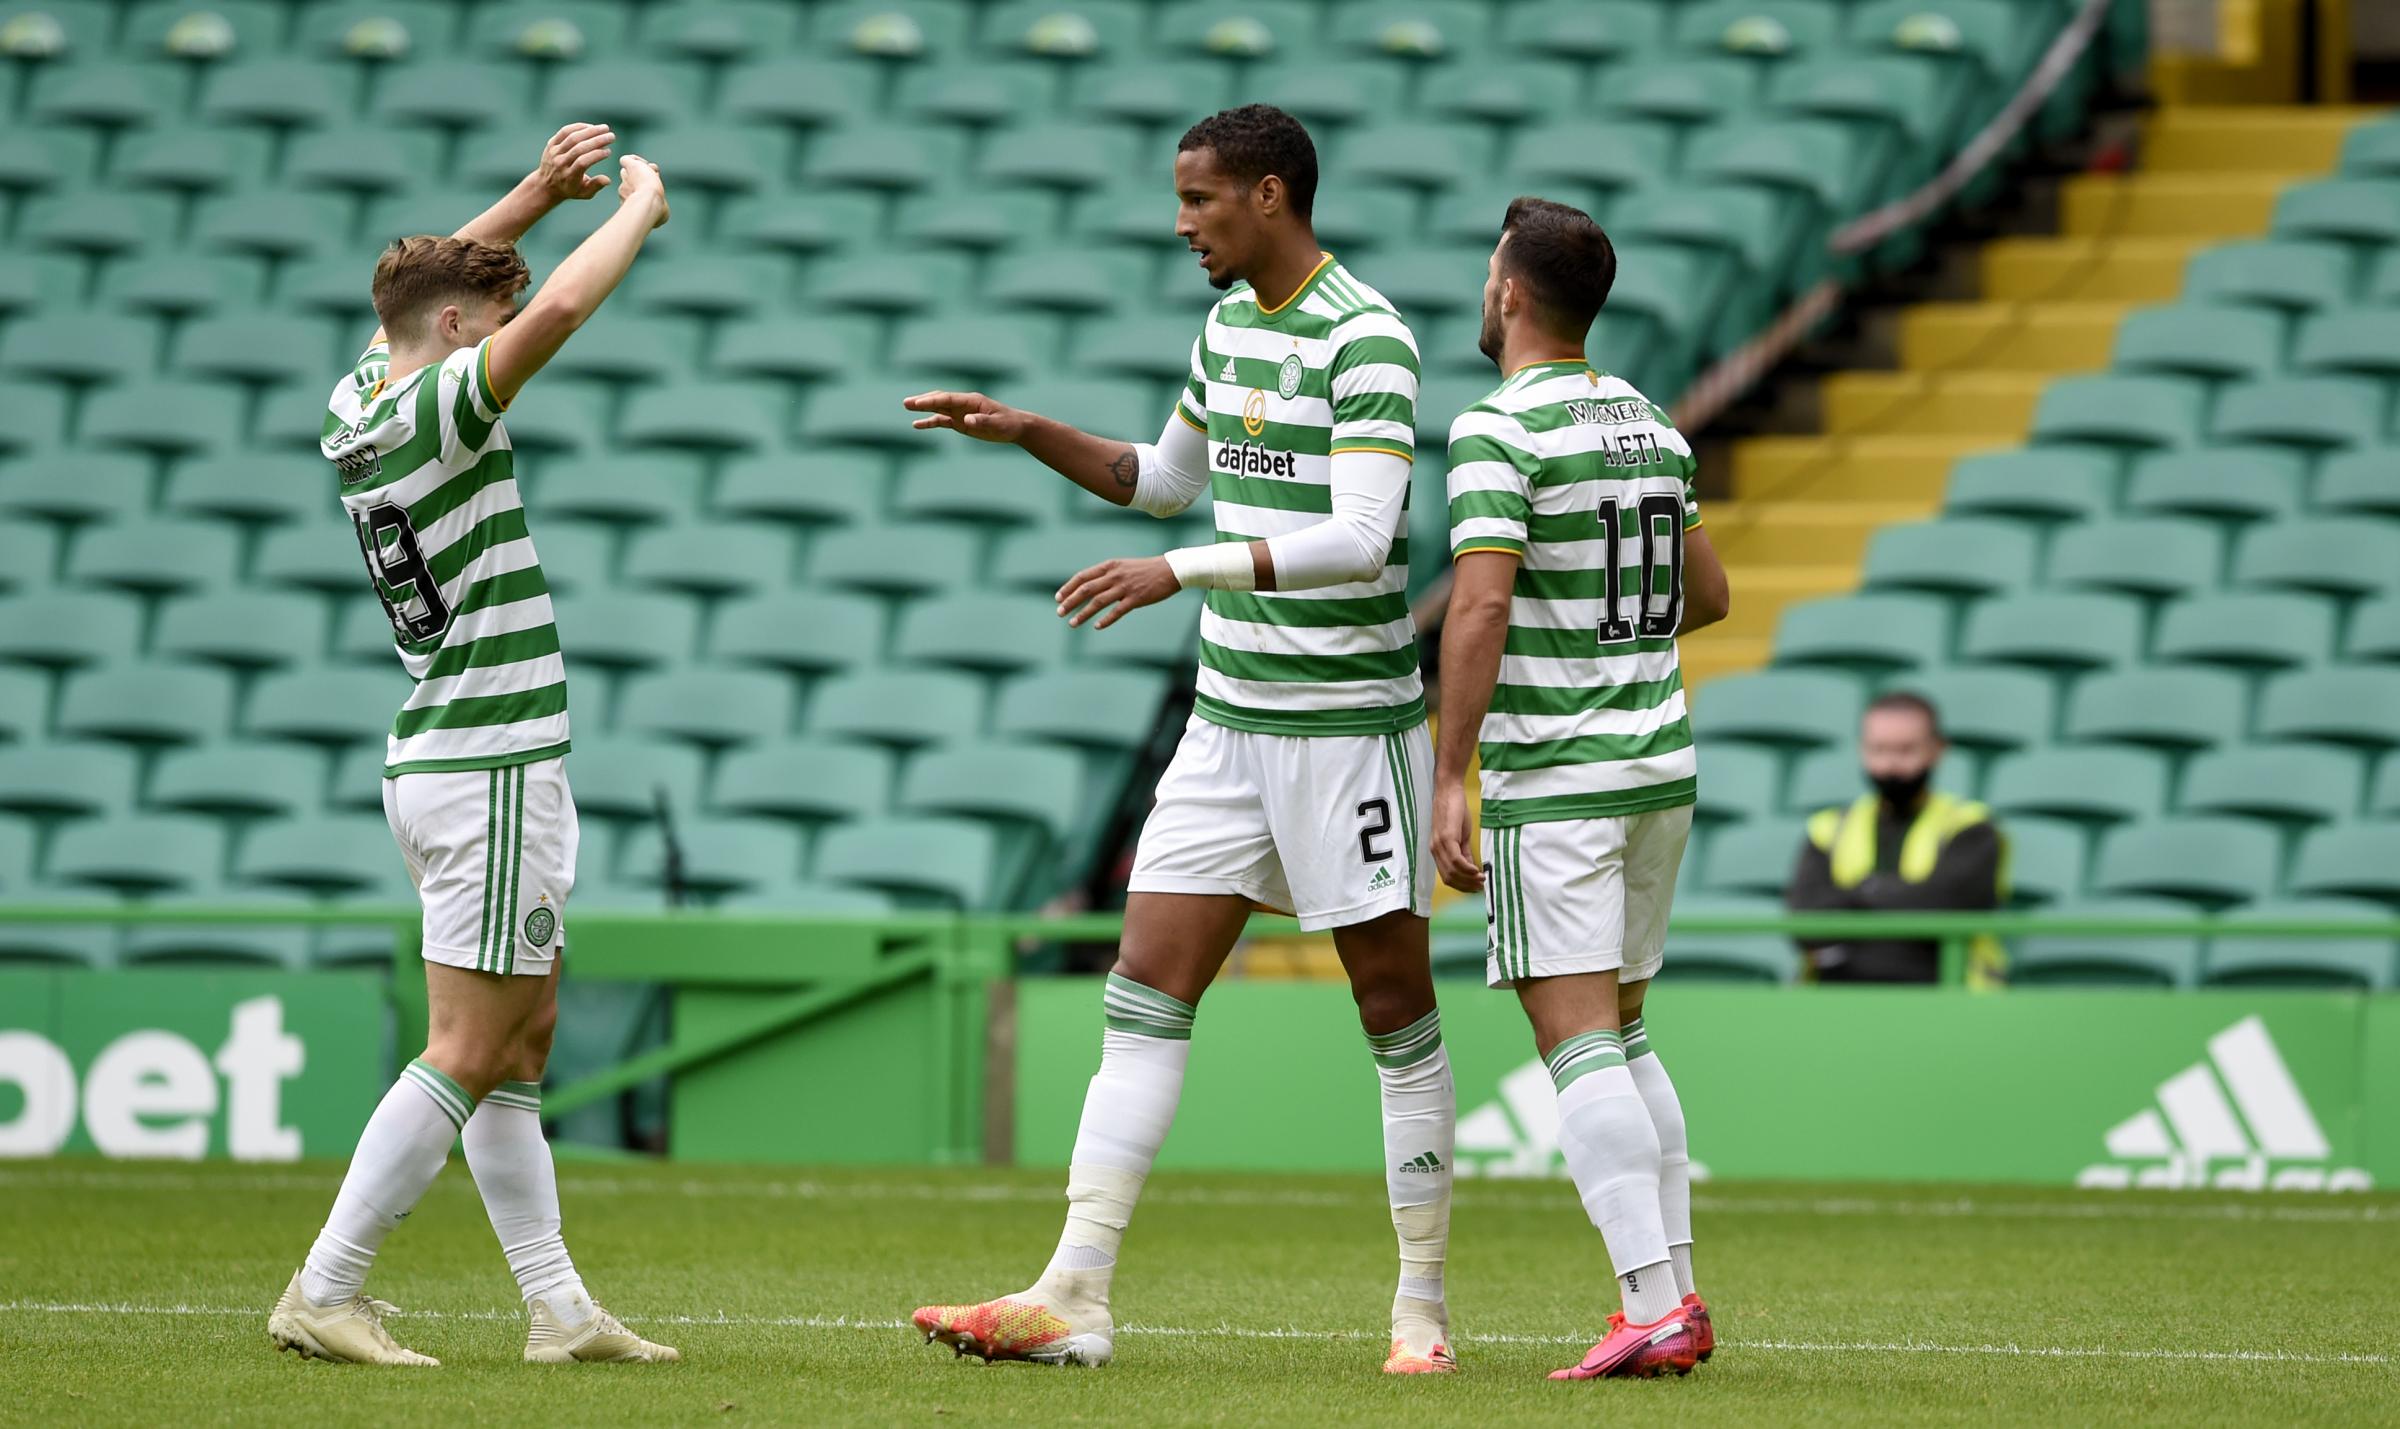 Celtic 3 Motherwell 0: Striking similarities as Celtic huff, puff, and eventually blow Motherwell away